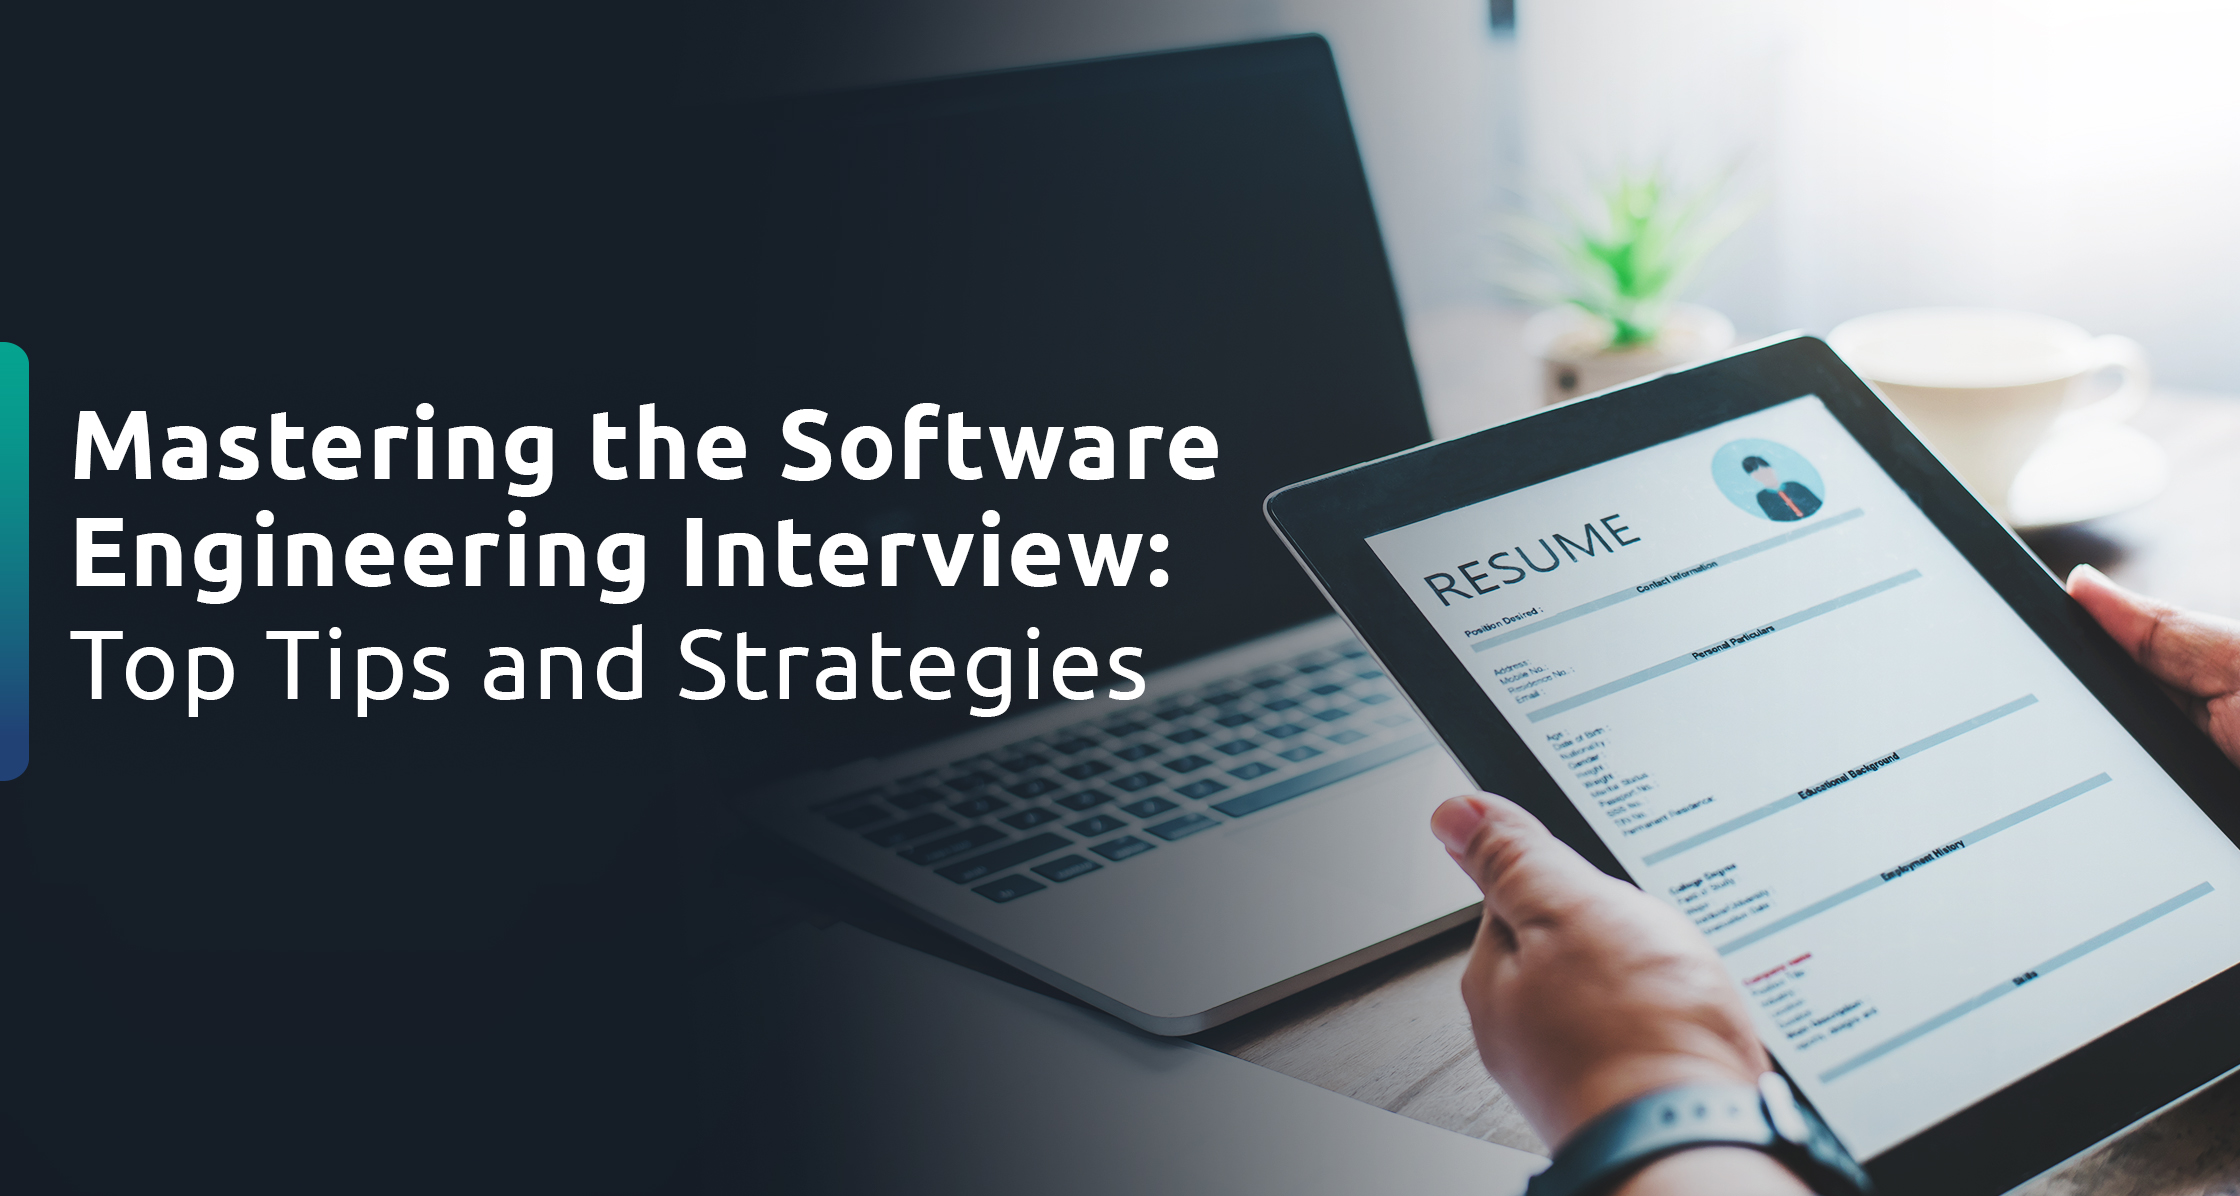 Mastering the Software Engineering Interview Top Tips and Strategies